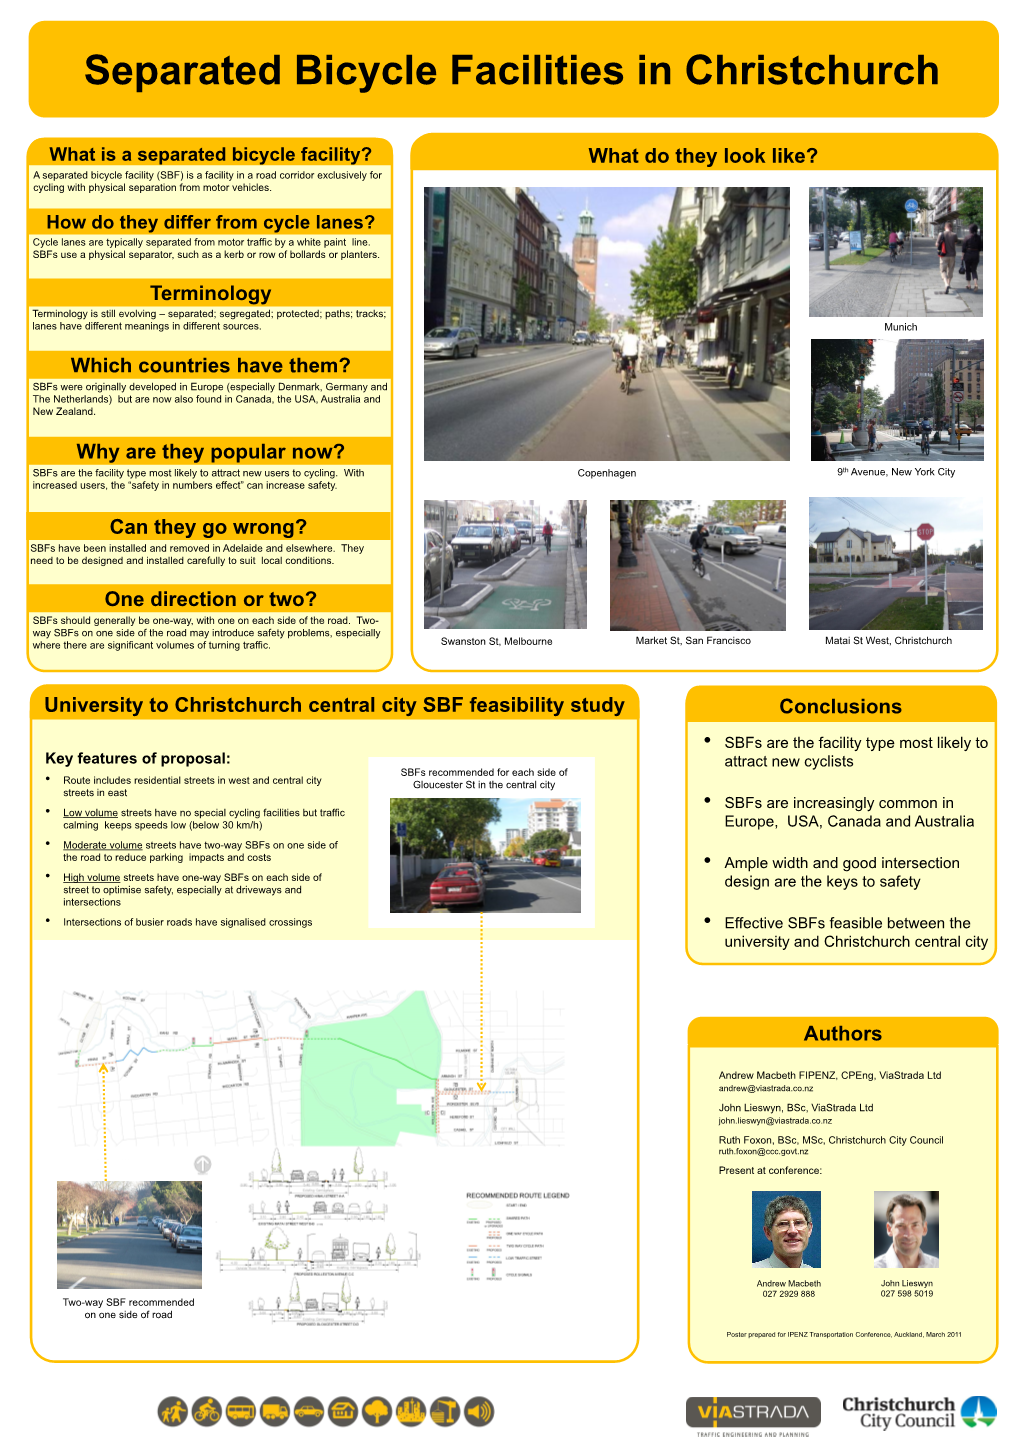 Poster Prepared for IPENZ Transportation Conference, Auckland, March 2011